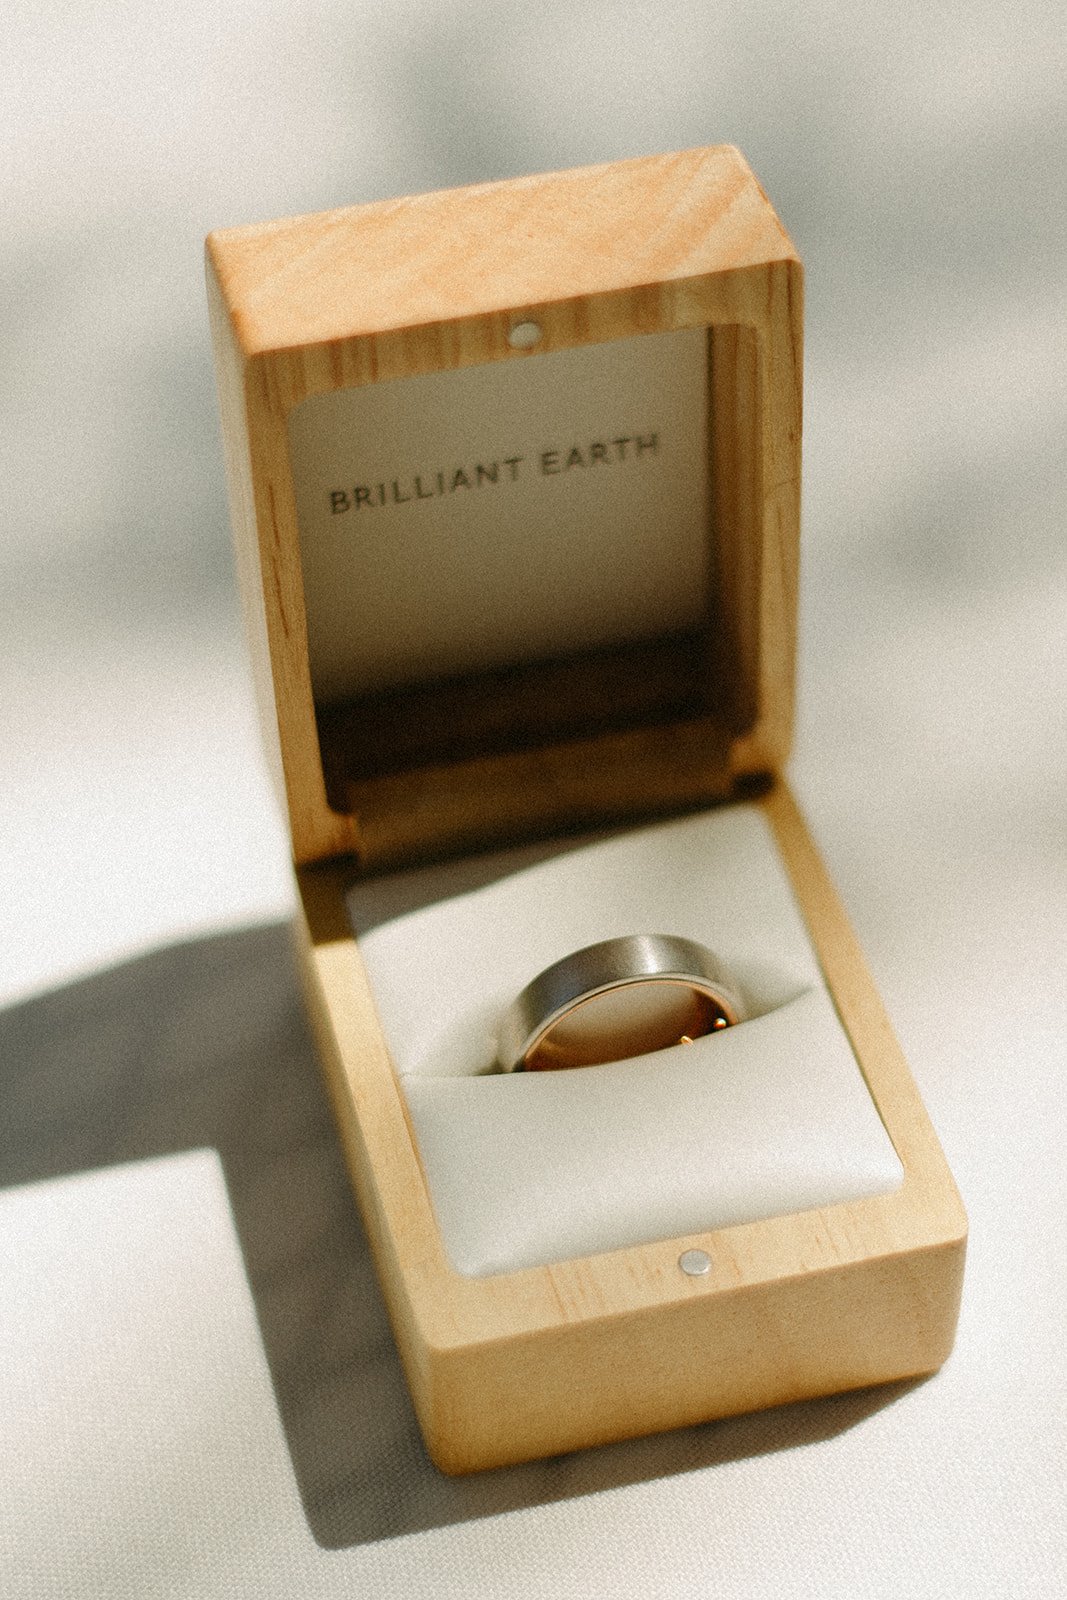 Groom wedding ring in a wooden box